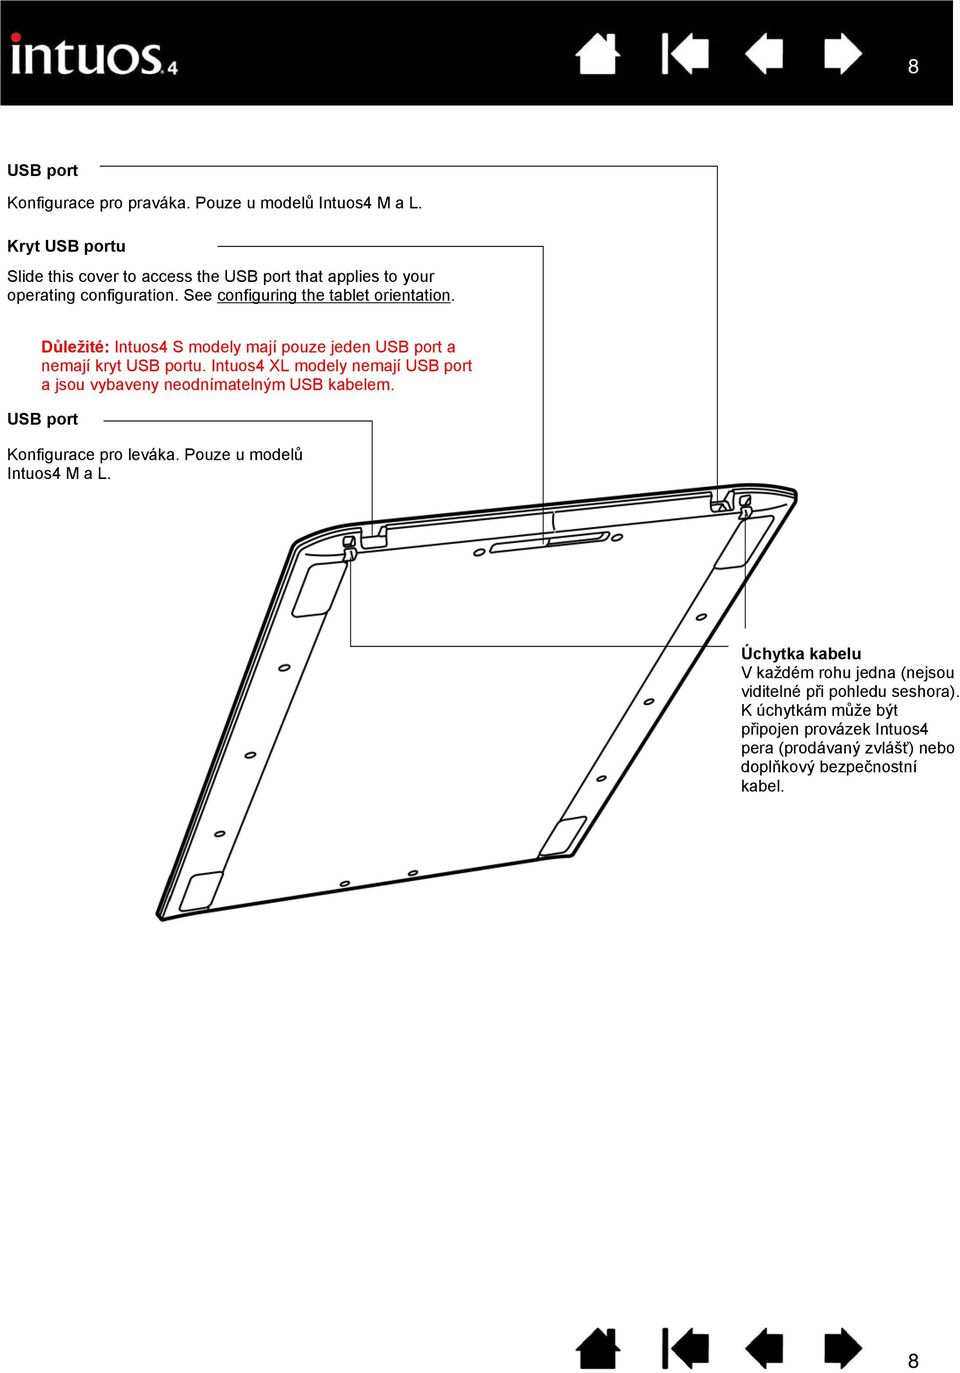 Important: Intuos4 S tablet models have only one USB port and no access cover. Intuos4 XL models do not have a USB port and are equipped with an attached USB cable.